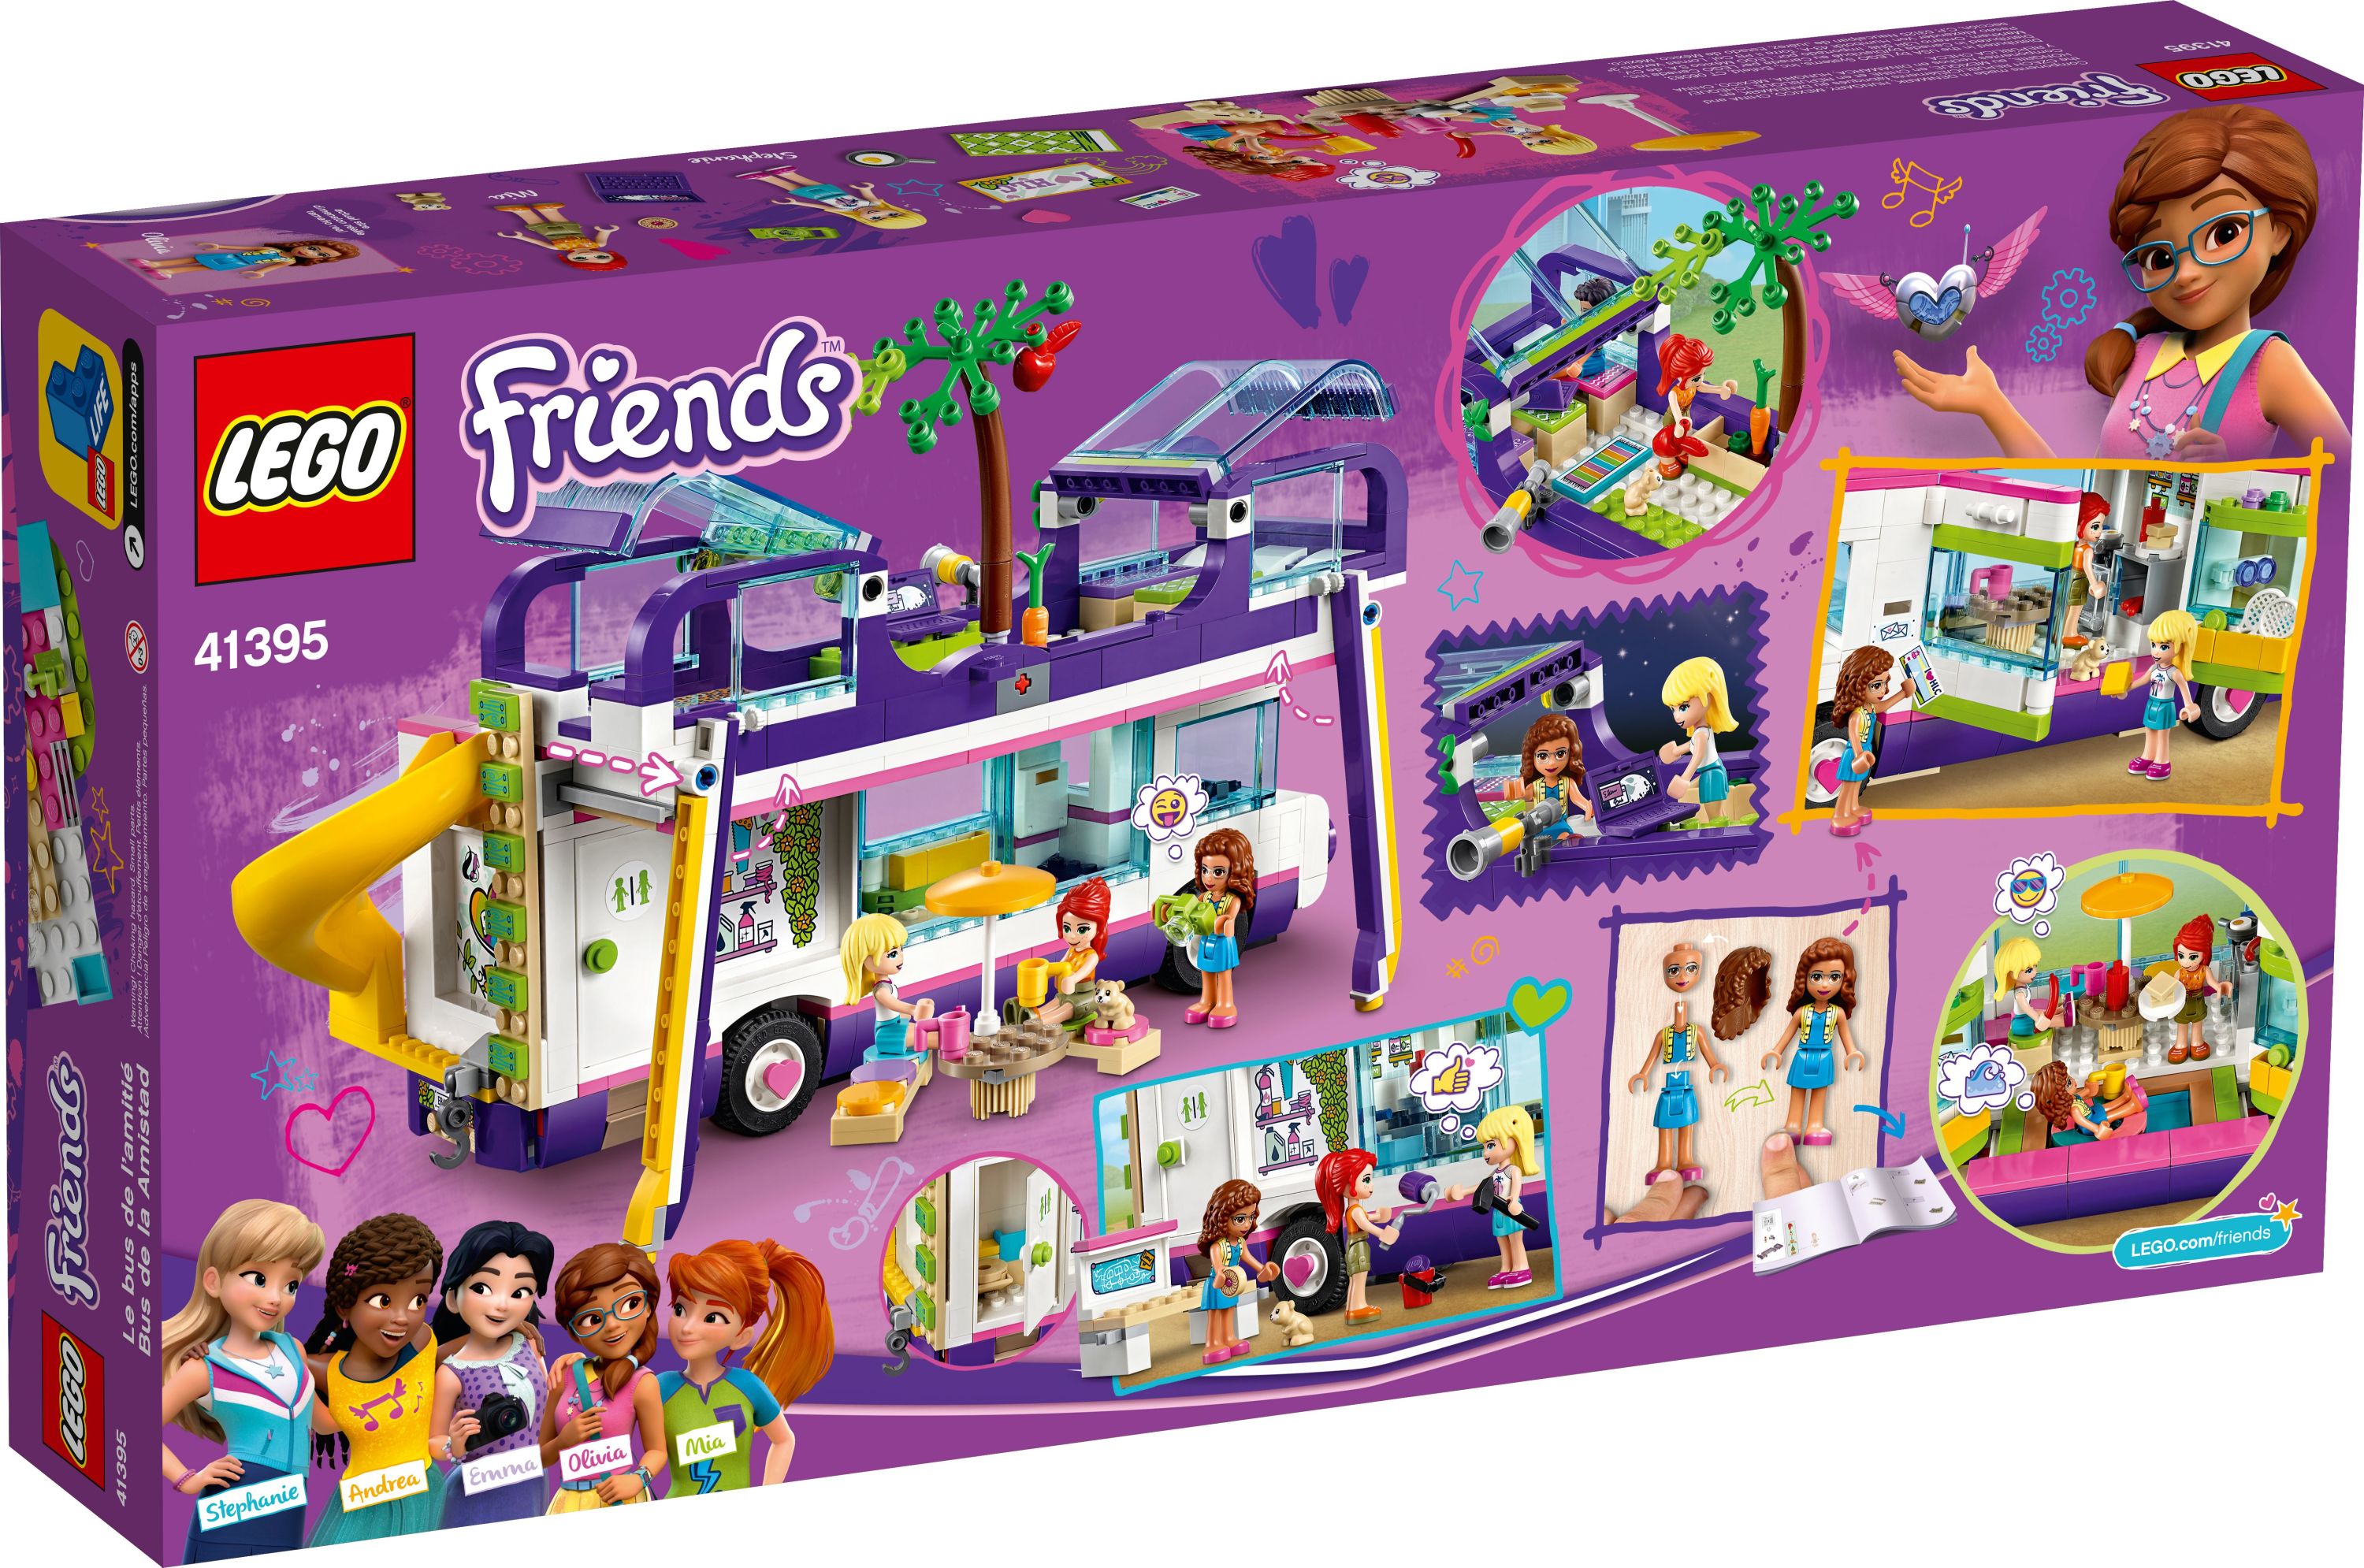 LEGO Friends Friendship Bus 41395 LEGO Heartlake City Toy Playset (778 Pieces) - image 5 of 7